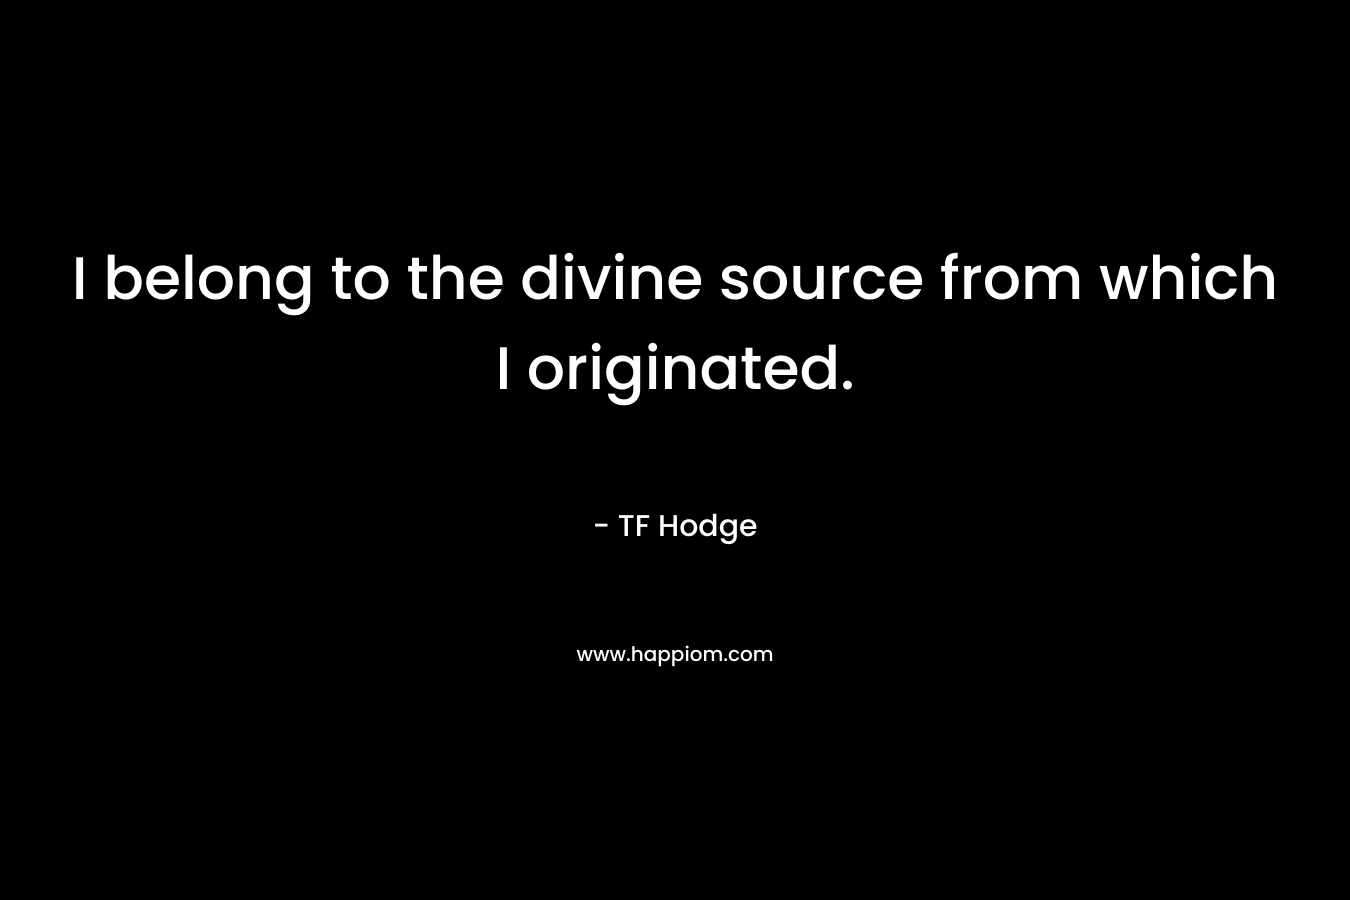 I belong to the divine source from which I originated. – TF Hodge